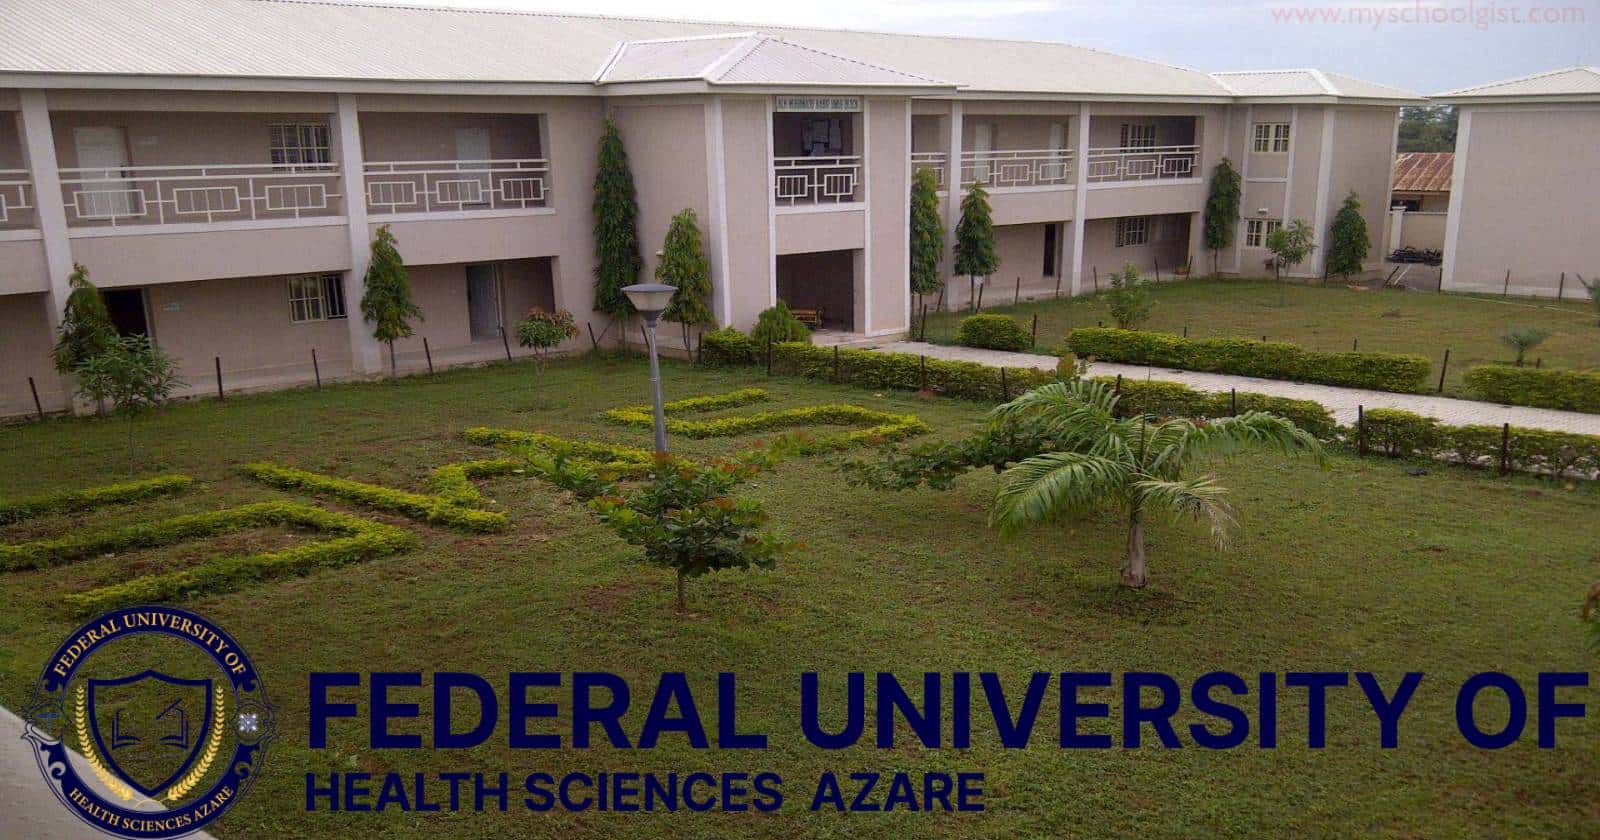 Federal University of Health Sciences Azare (FUHSA) Physical Screening